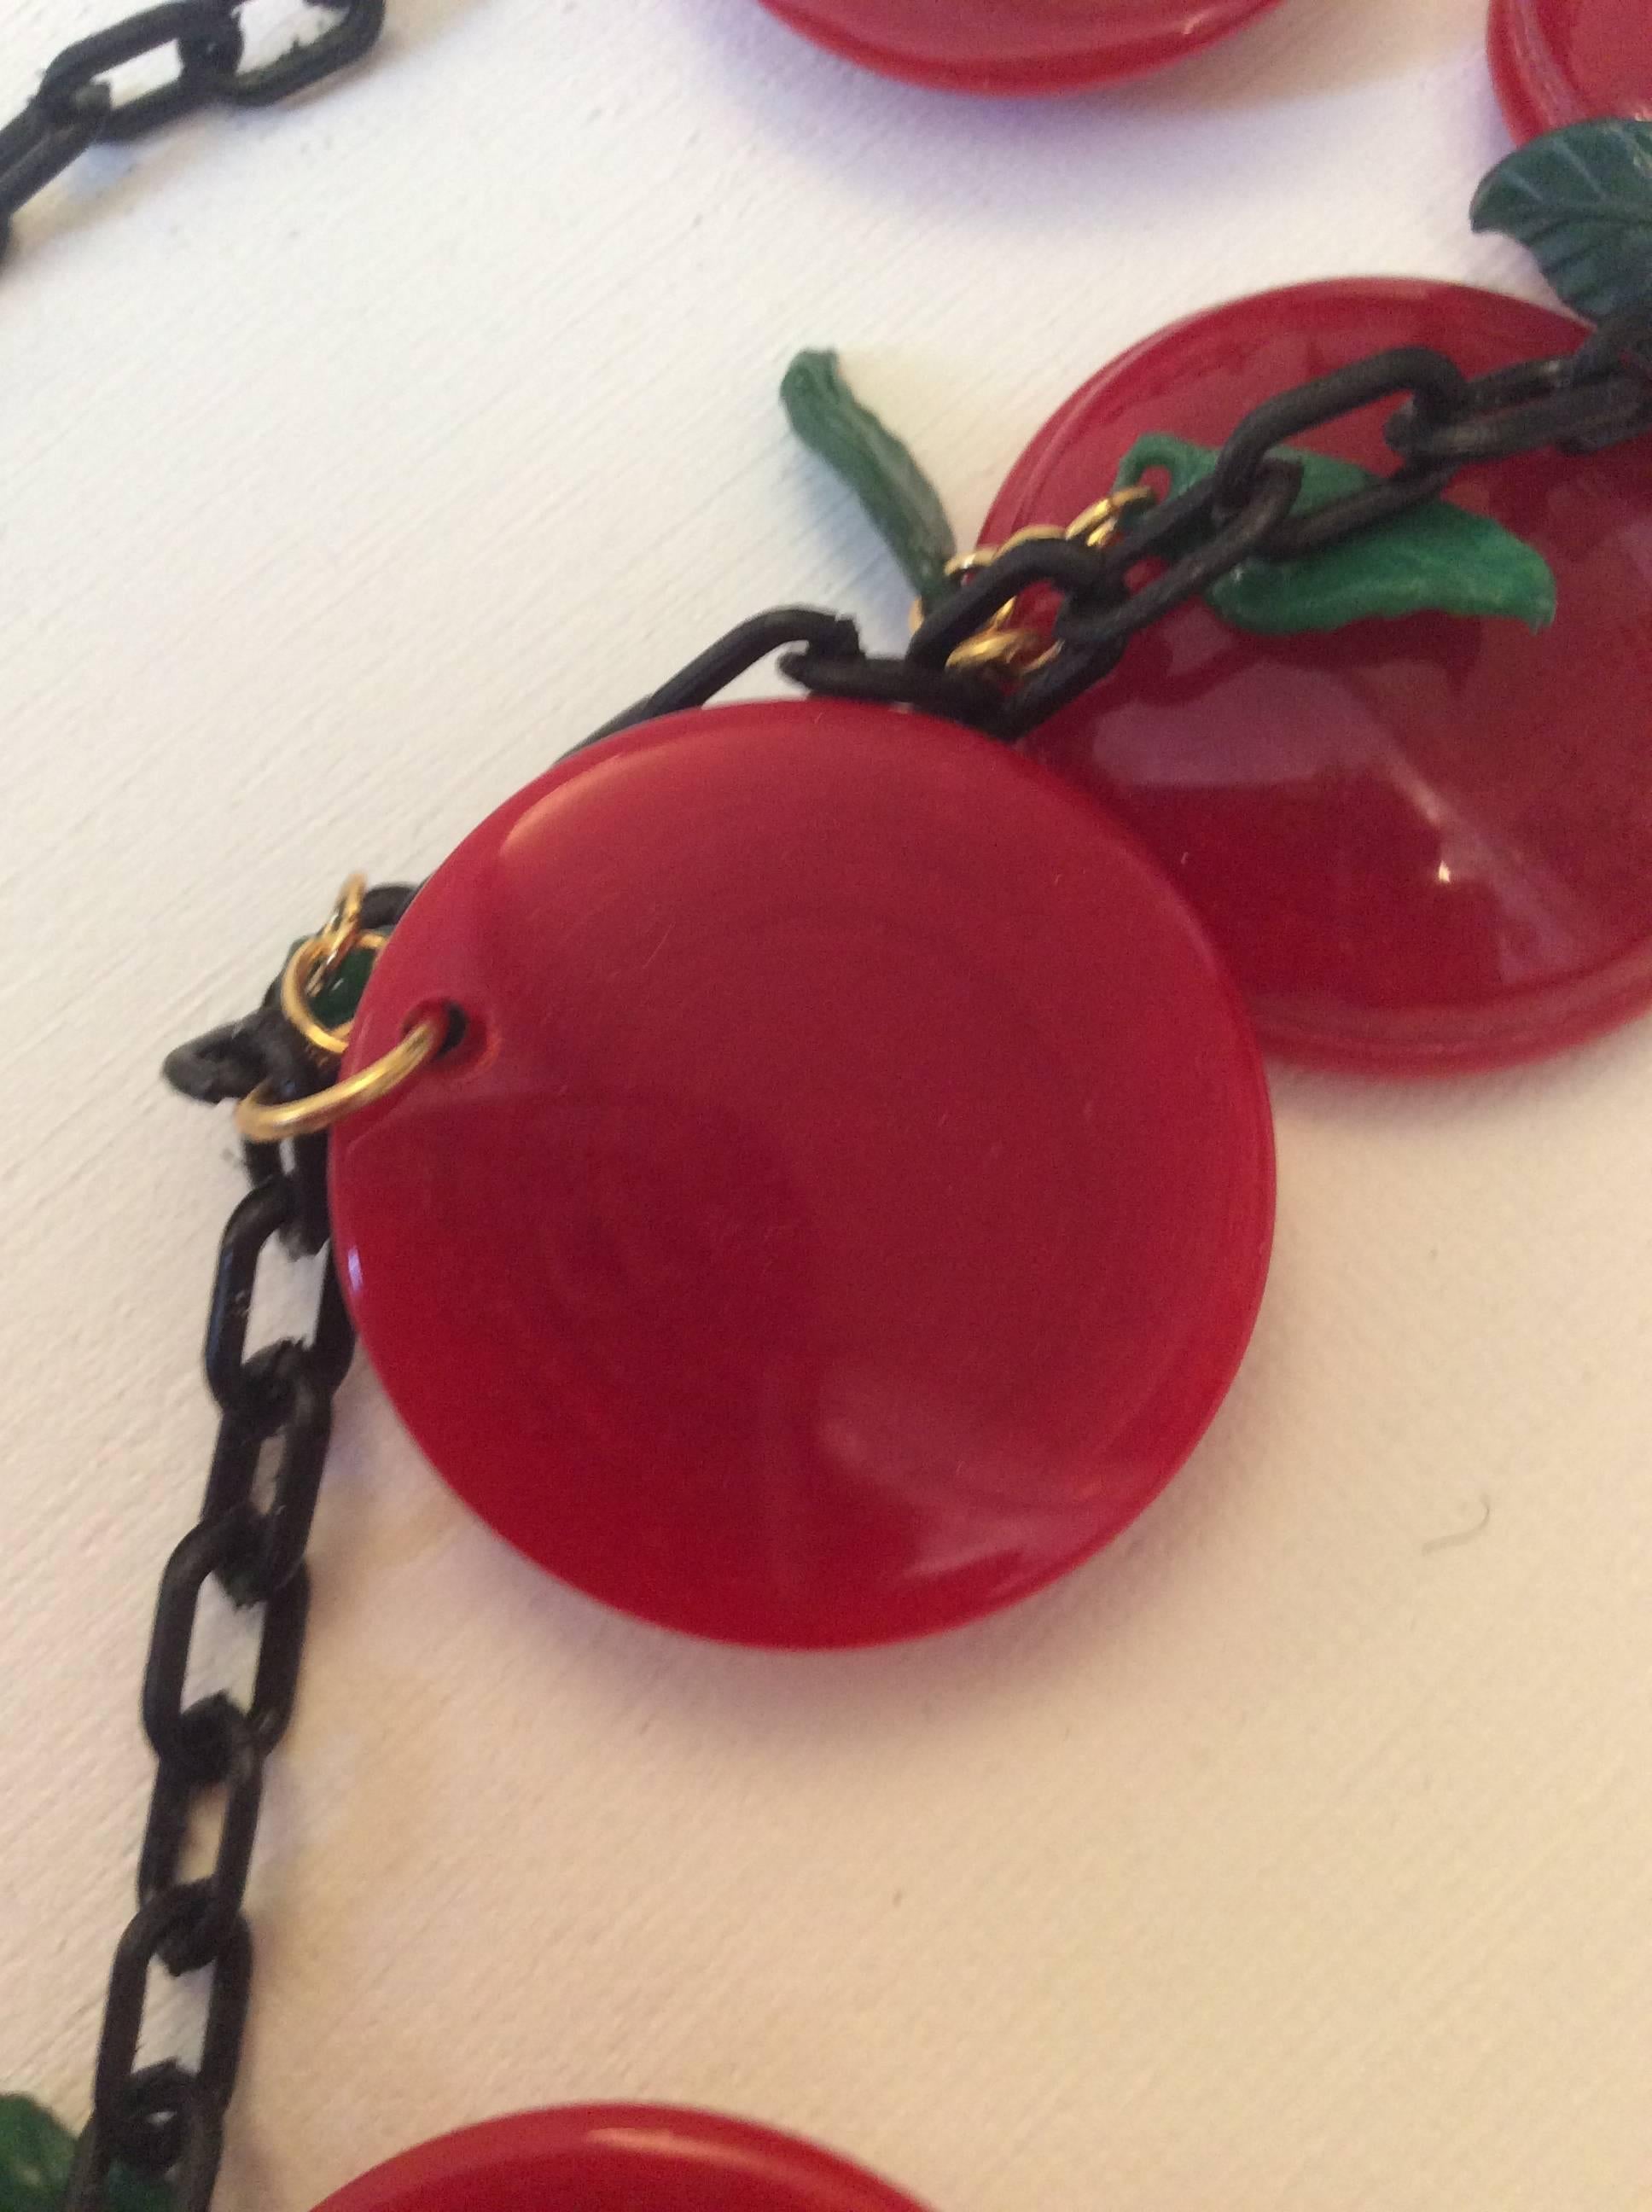  Bakelite Necklace Cherry with Matching Earrings In Excellent Condition For Sale In Boca Raton, FL